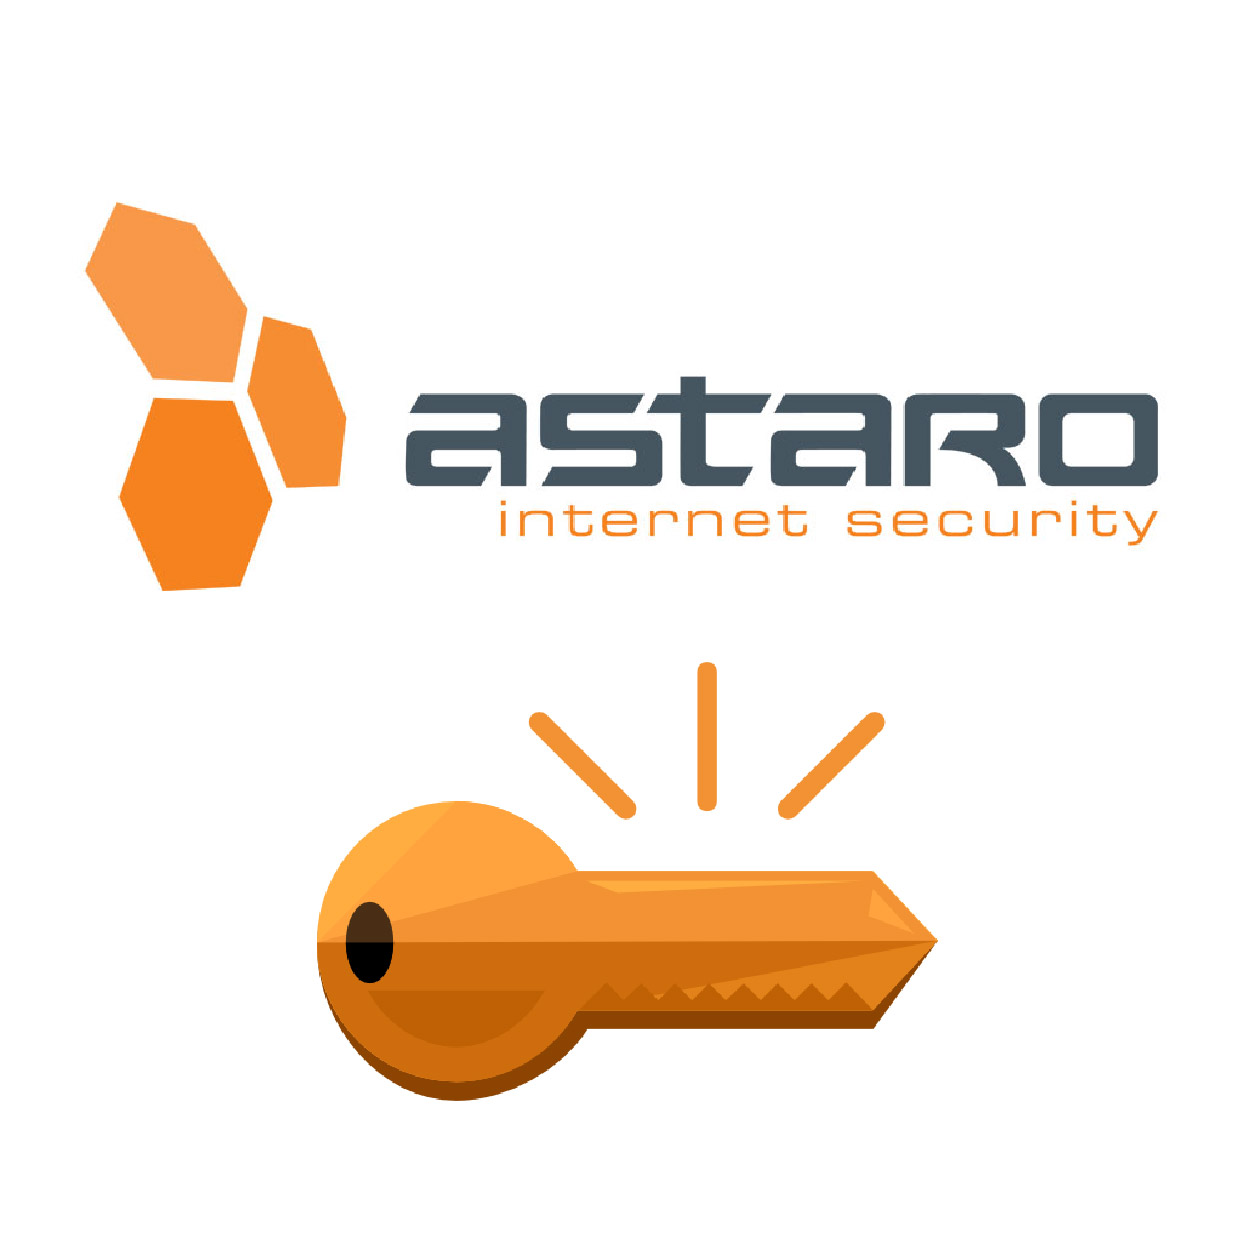 Astaro - ASG 425 Network Security Subscription - Upgrading Key, Firewall